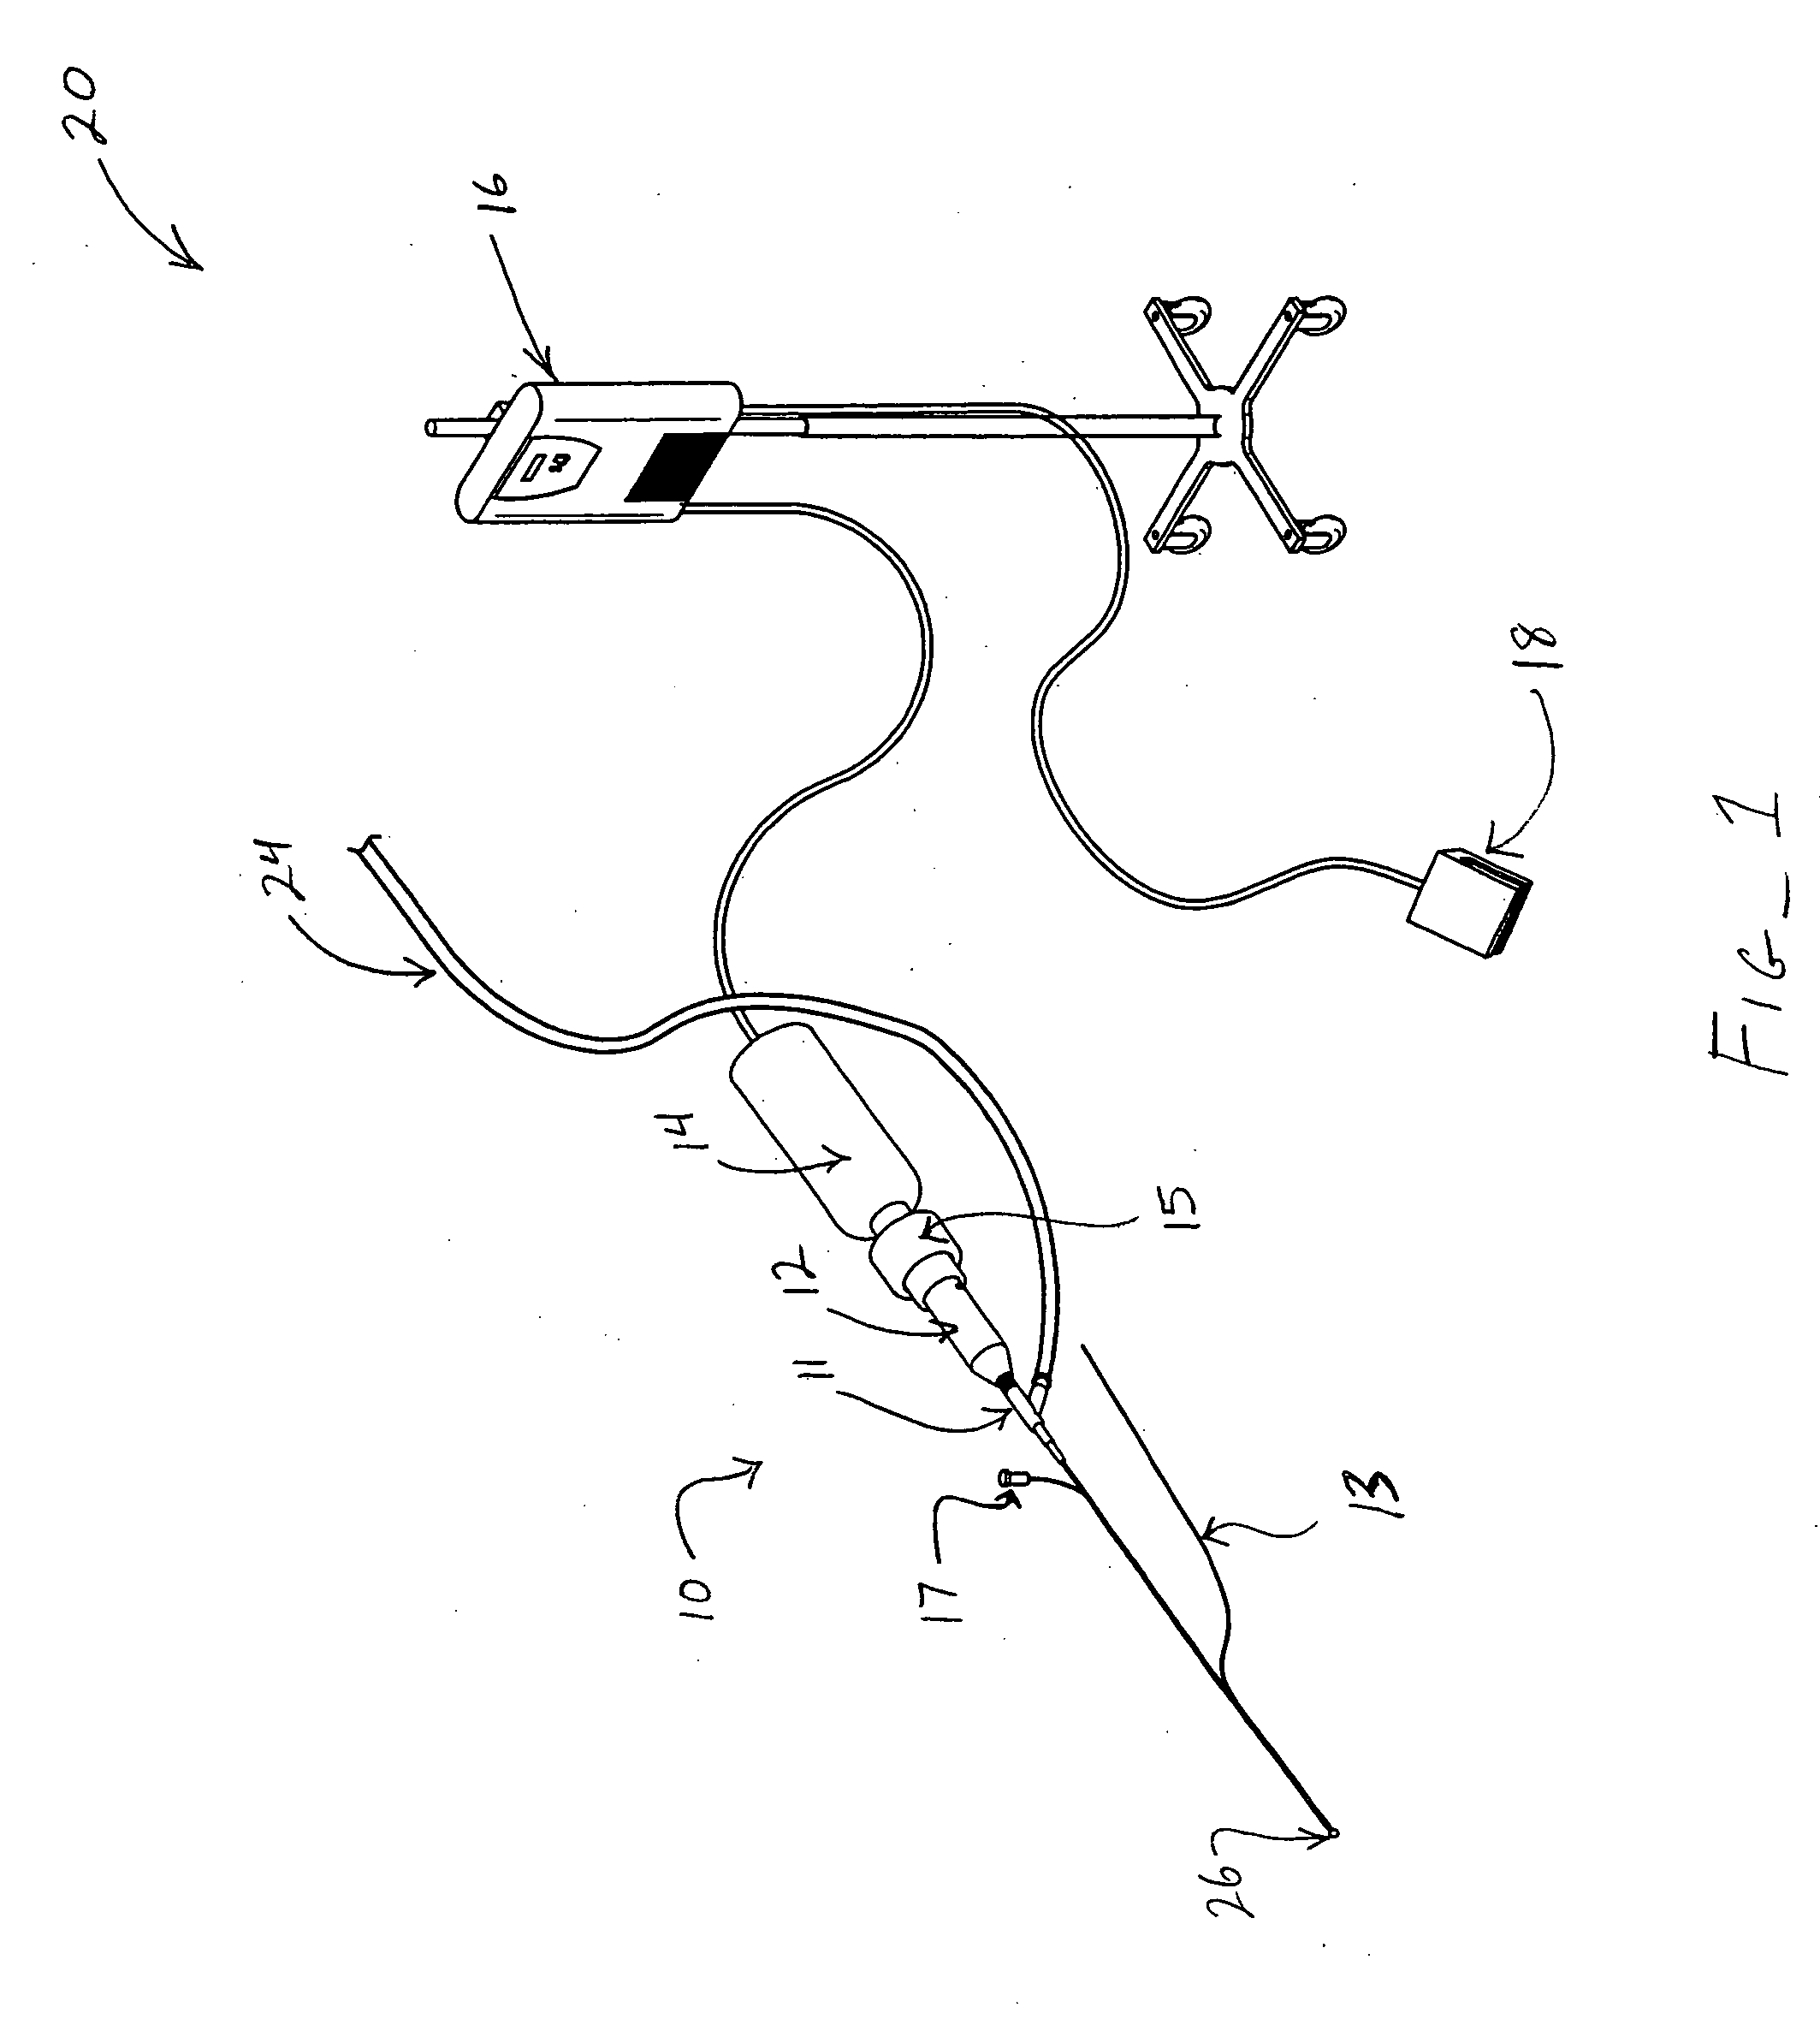 Ultrasound catheter devices and methods